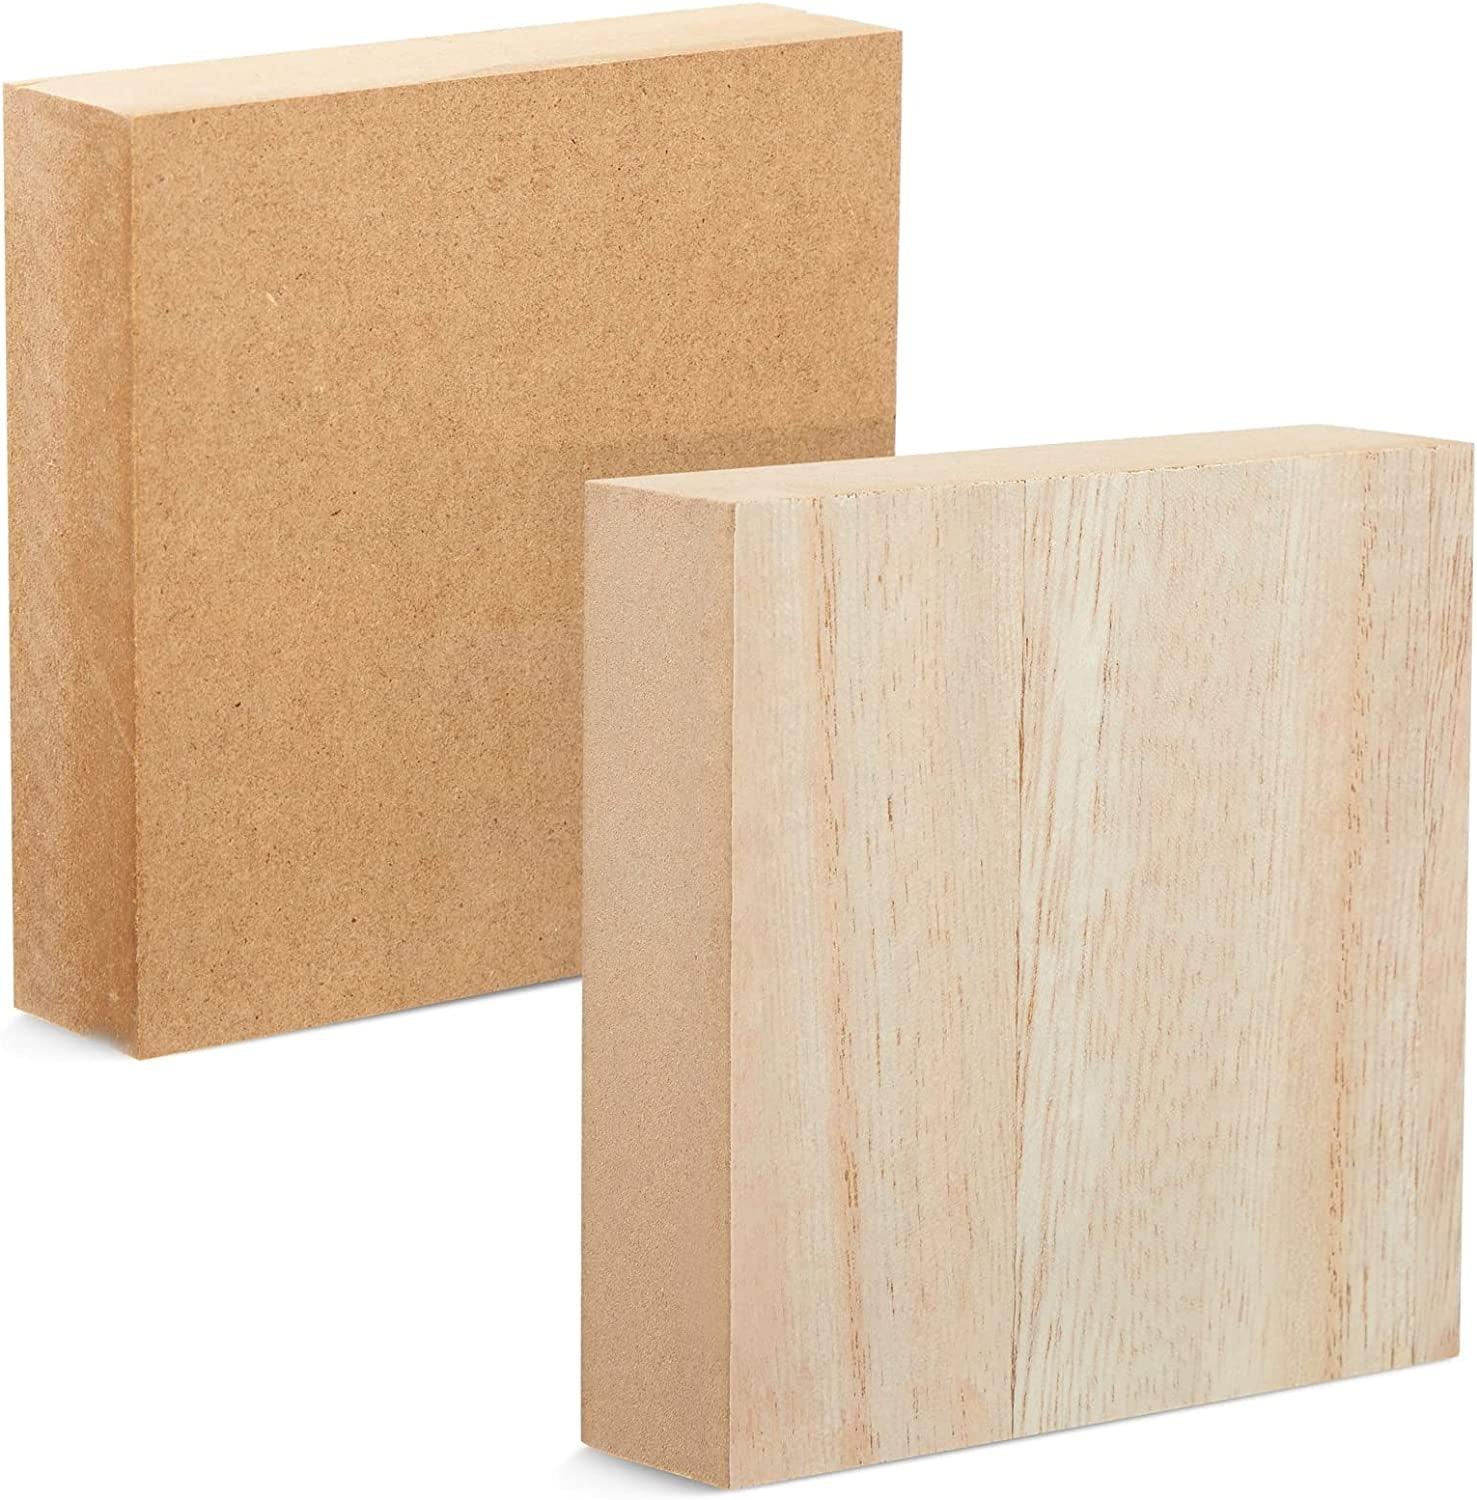 Unfinished MDF Wood Blocks for Crafts, 1 in Thick Wooden Square Blocks (4X4 In, 4 Pack) - WoodArtSupply